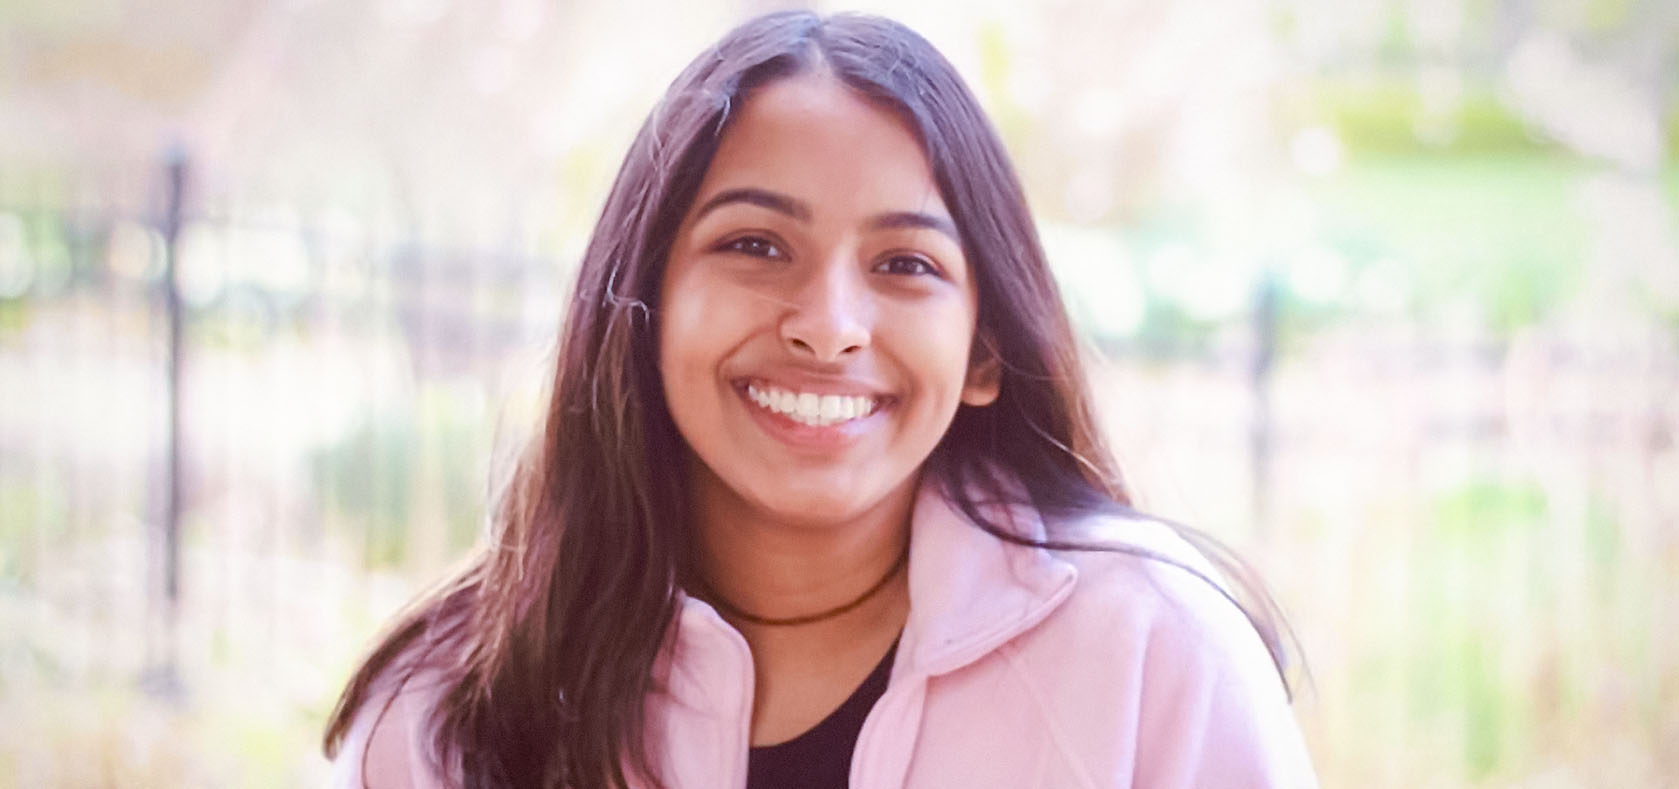 Devishi Jha,18, is climate activist and Director of Partnerships at Zero Hour, an international youth-led climate justice organization. Photo courtesy of Devishi Jha